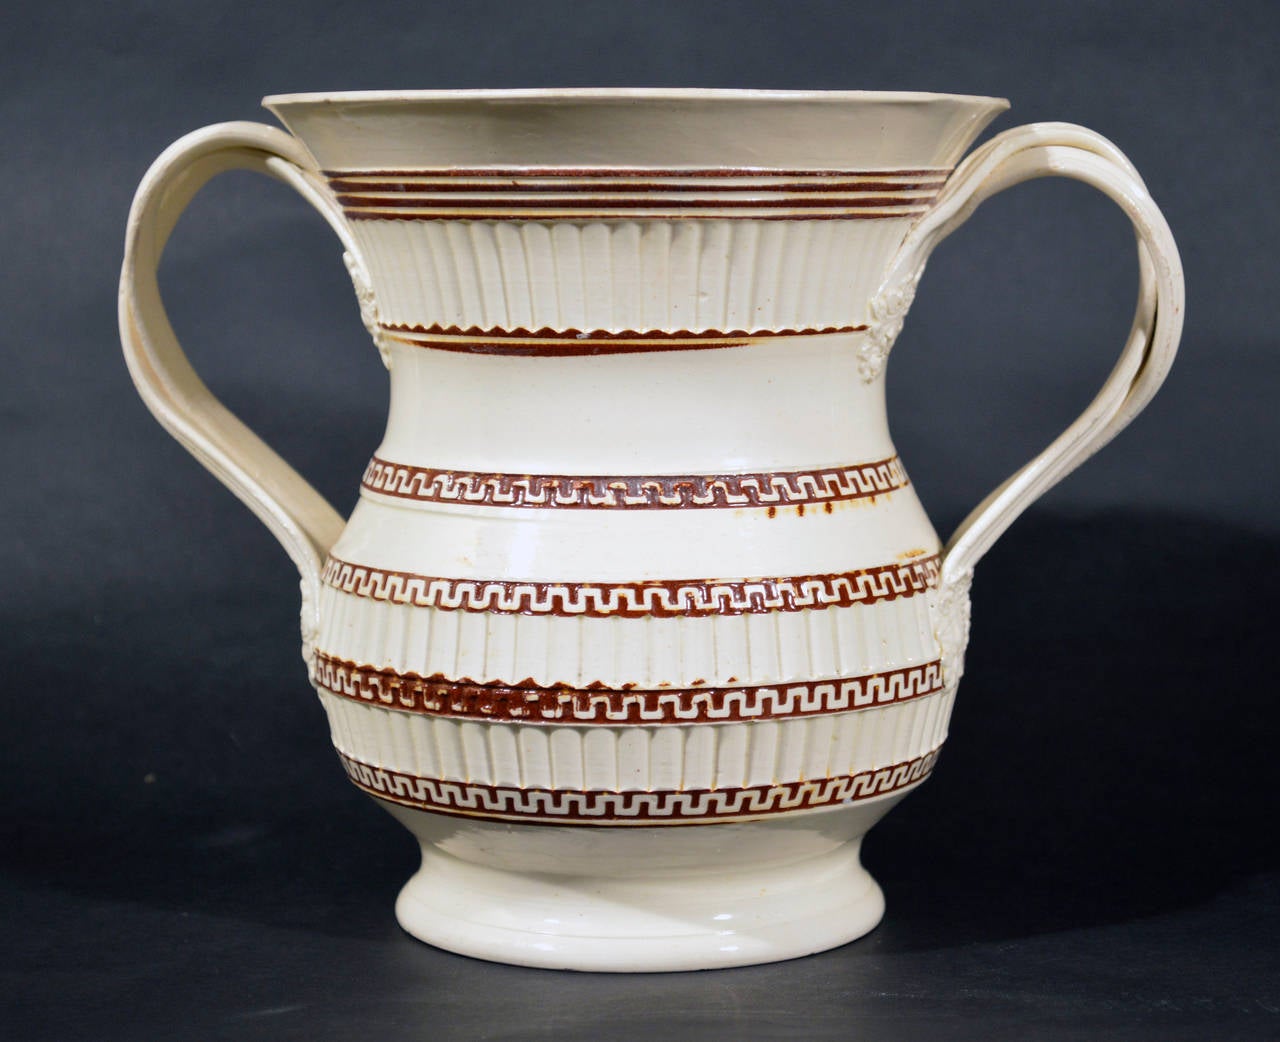 The body turned and rouletted with plain bands, reeding and a Greek key design with a brown slip ground. The large cup with two double twist reeded handles with oak leaf terminals.